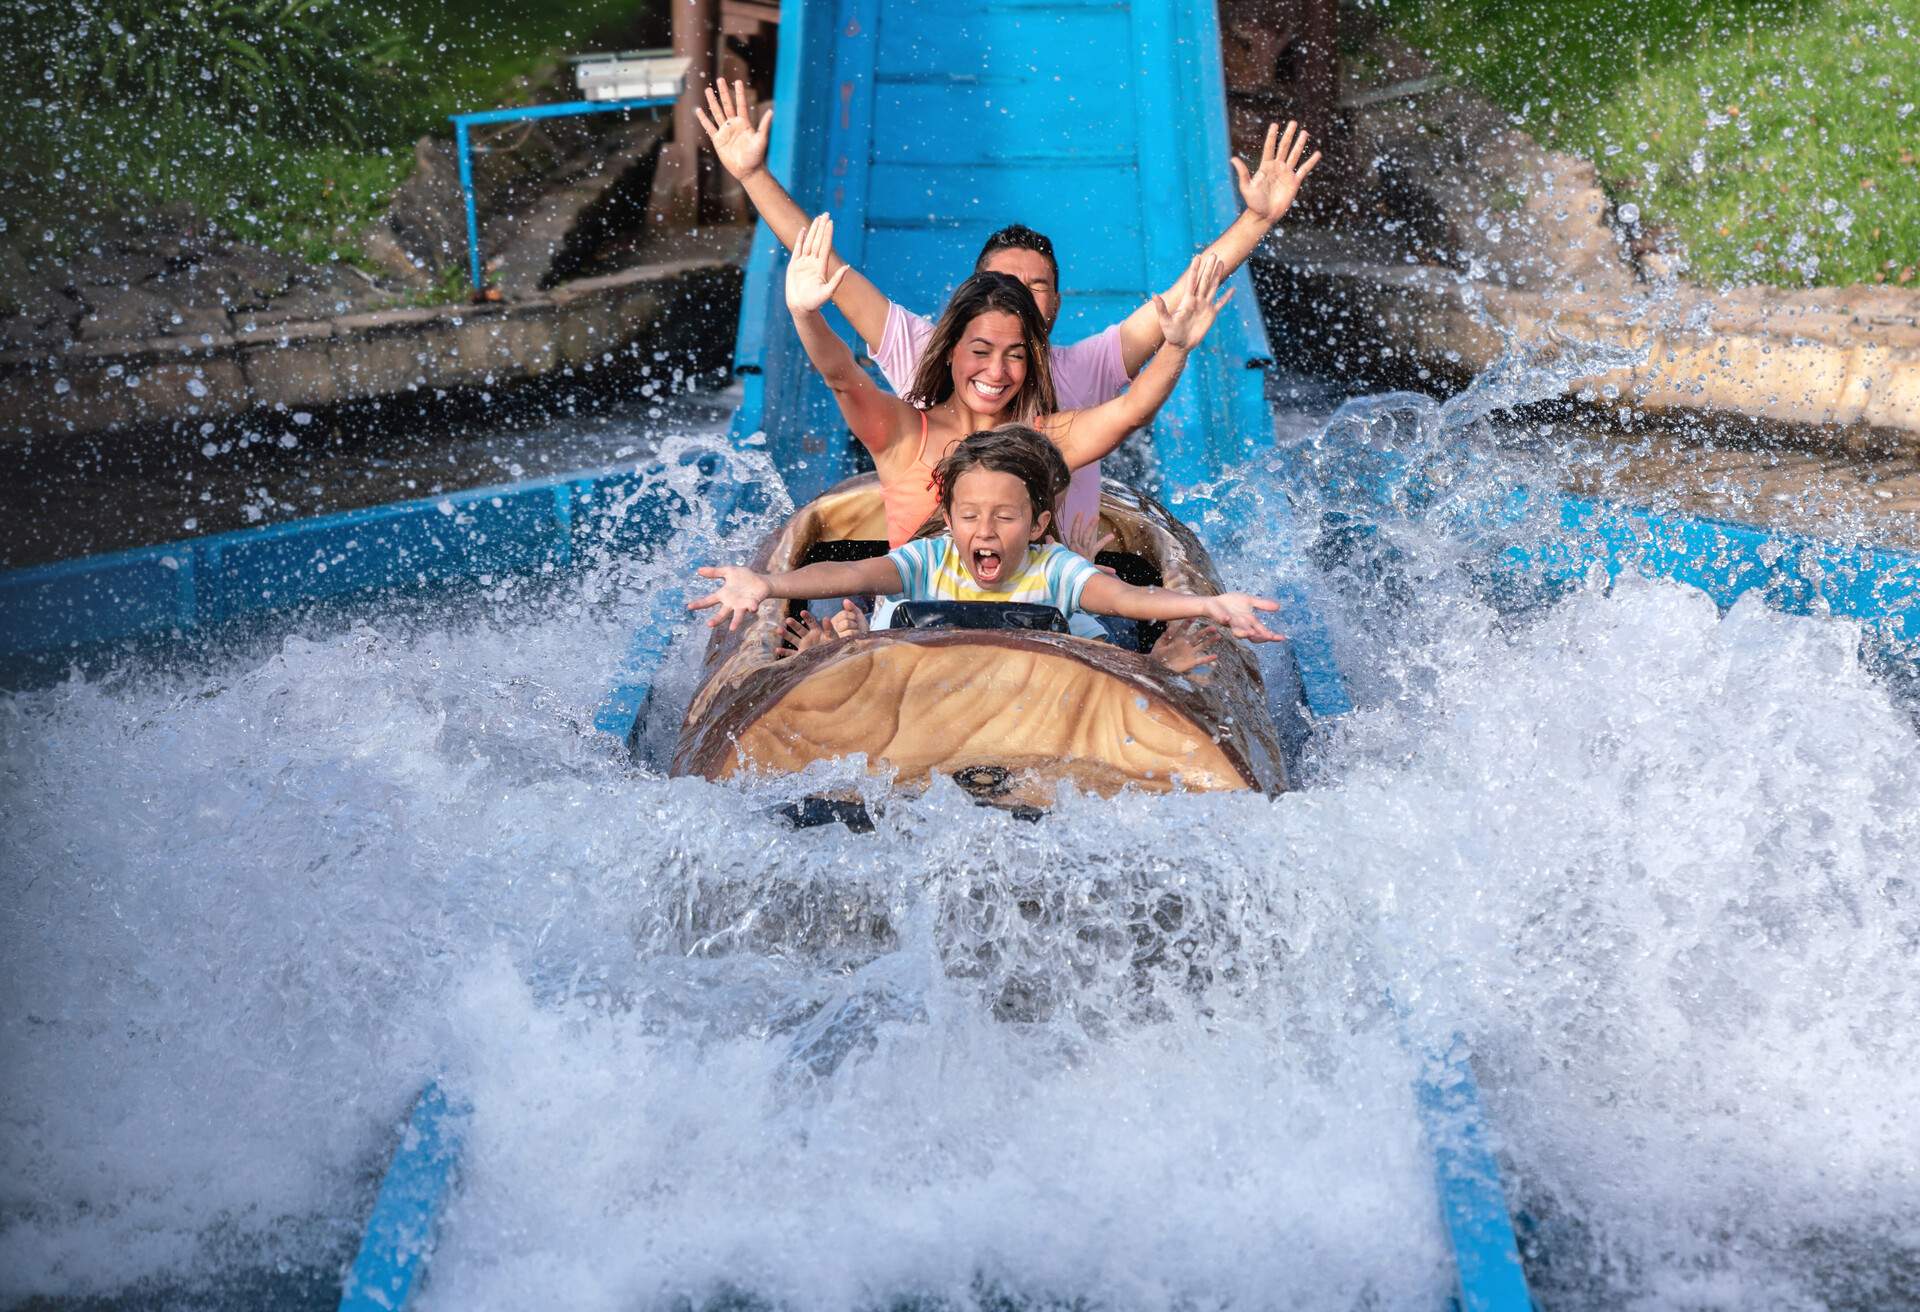 Happy family having fun in an amusement park riding on a fun water ride - lifestyle concepts